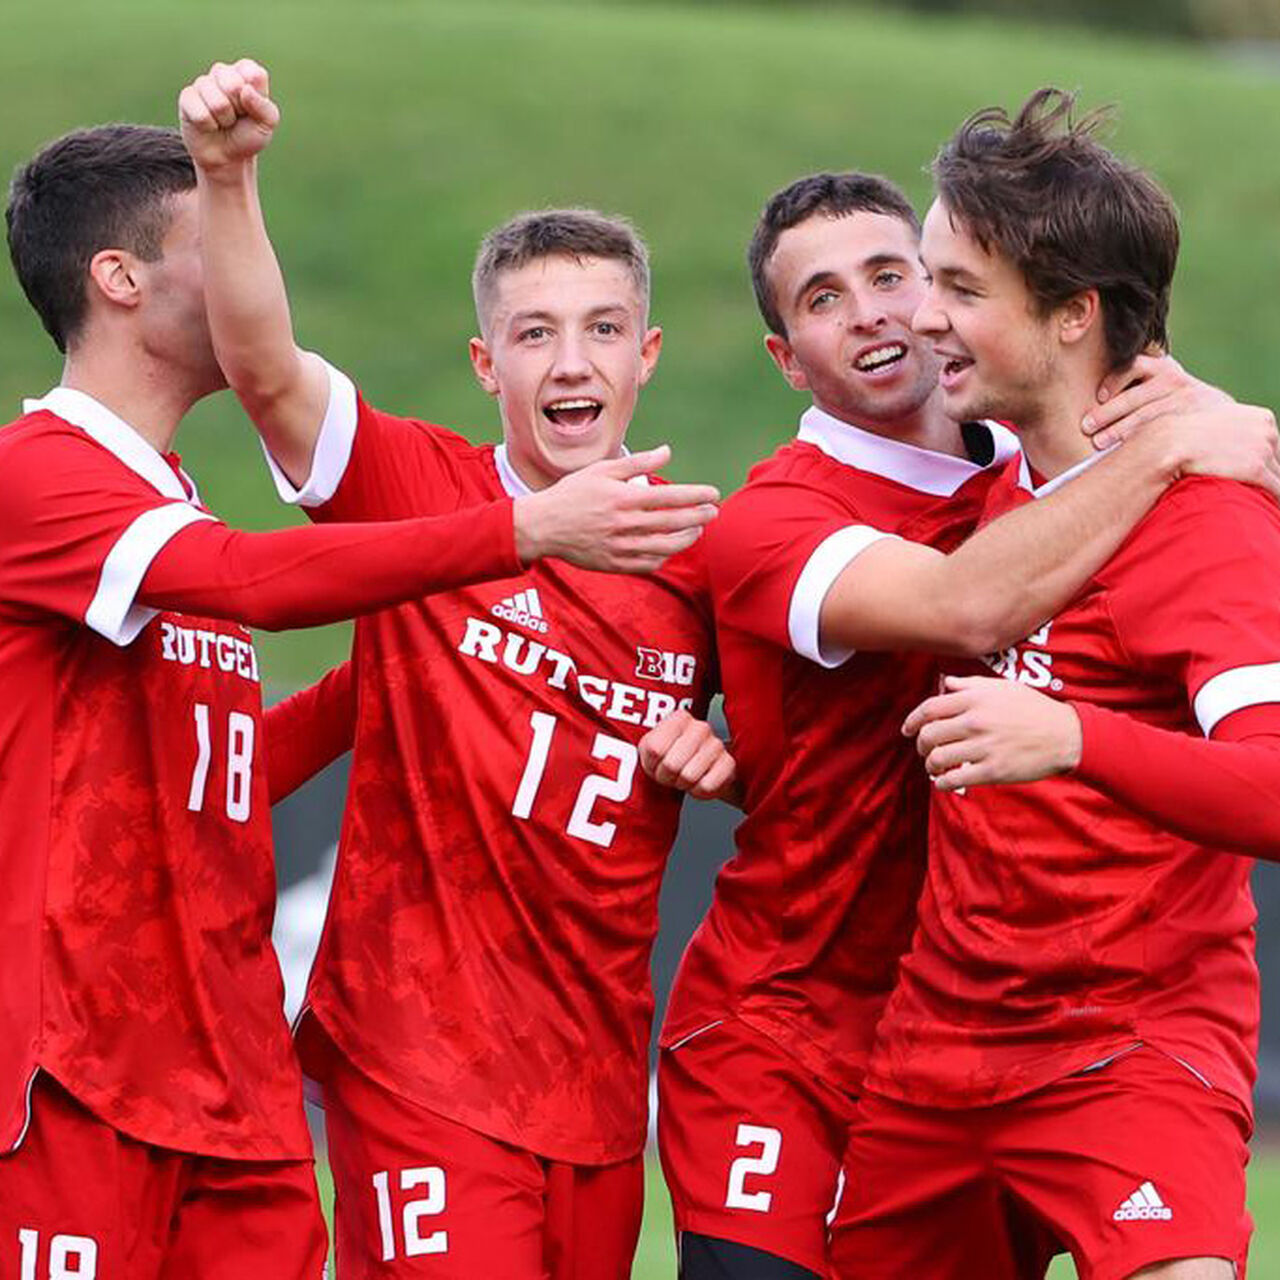 Four Rutgers Men's Soccer players cheering and hugging one another image number 0